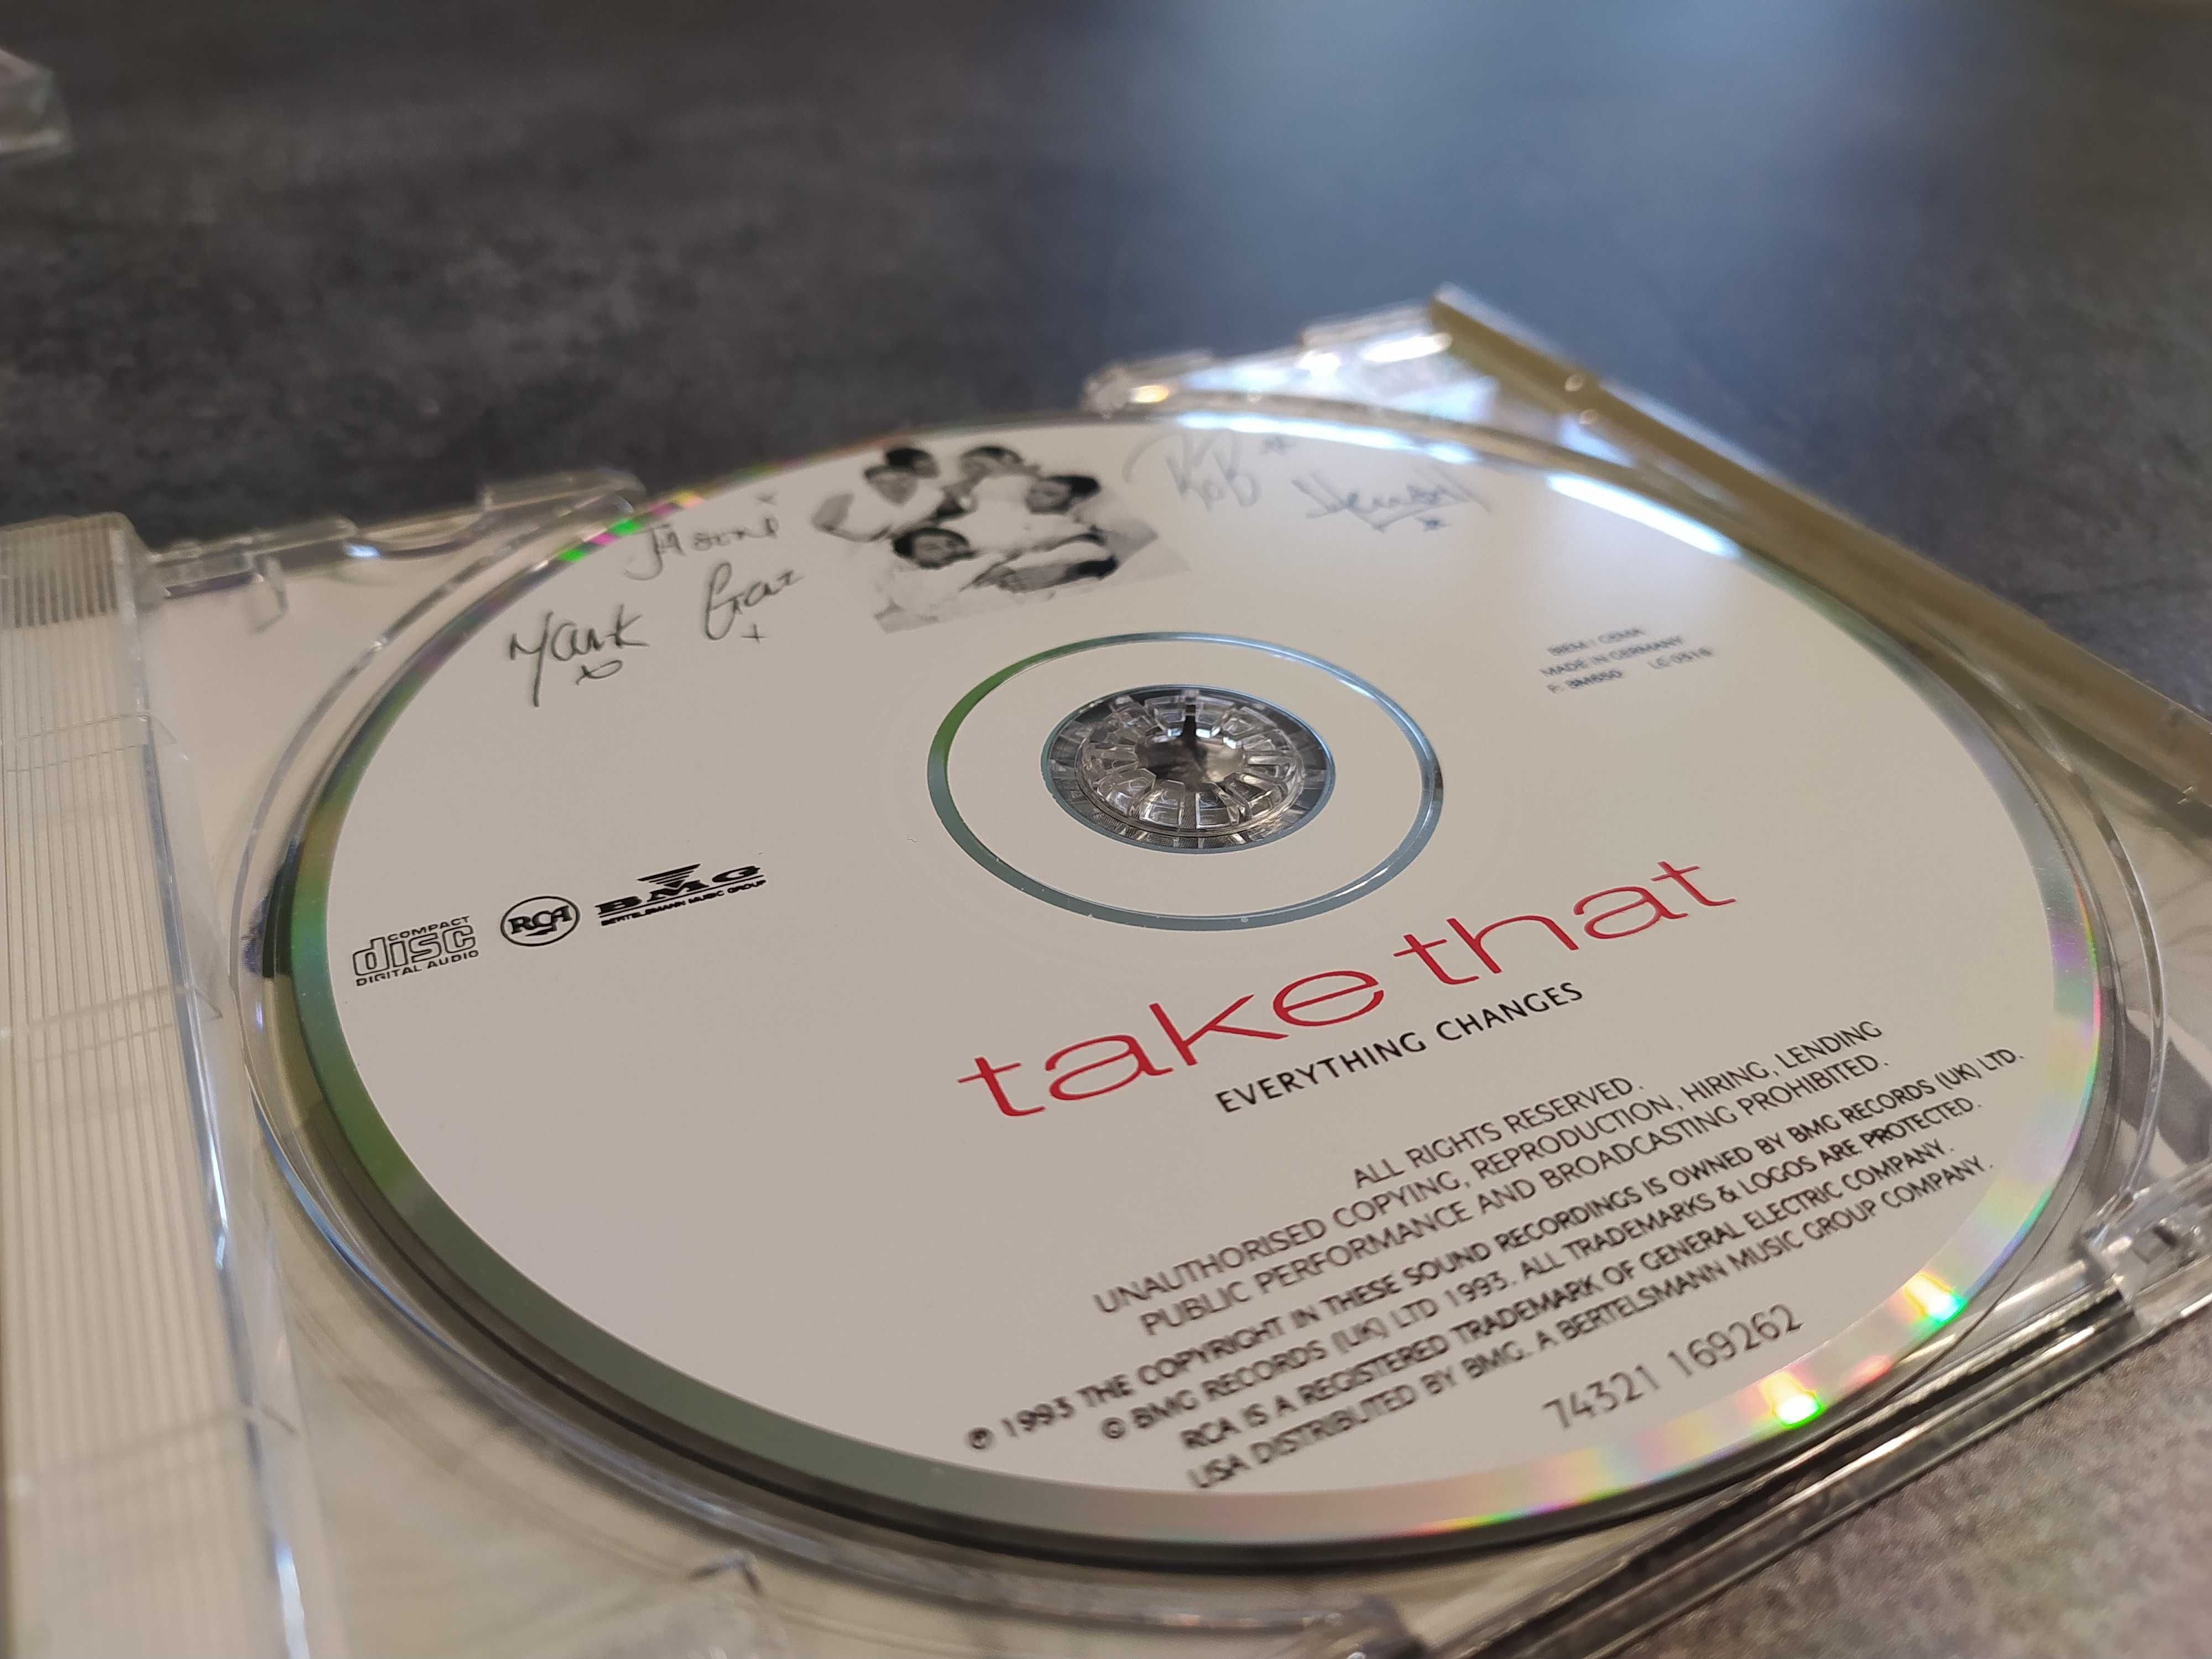 Take That -Everything Changes -CD Wrocław